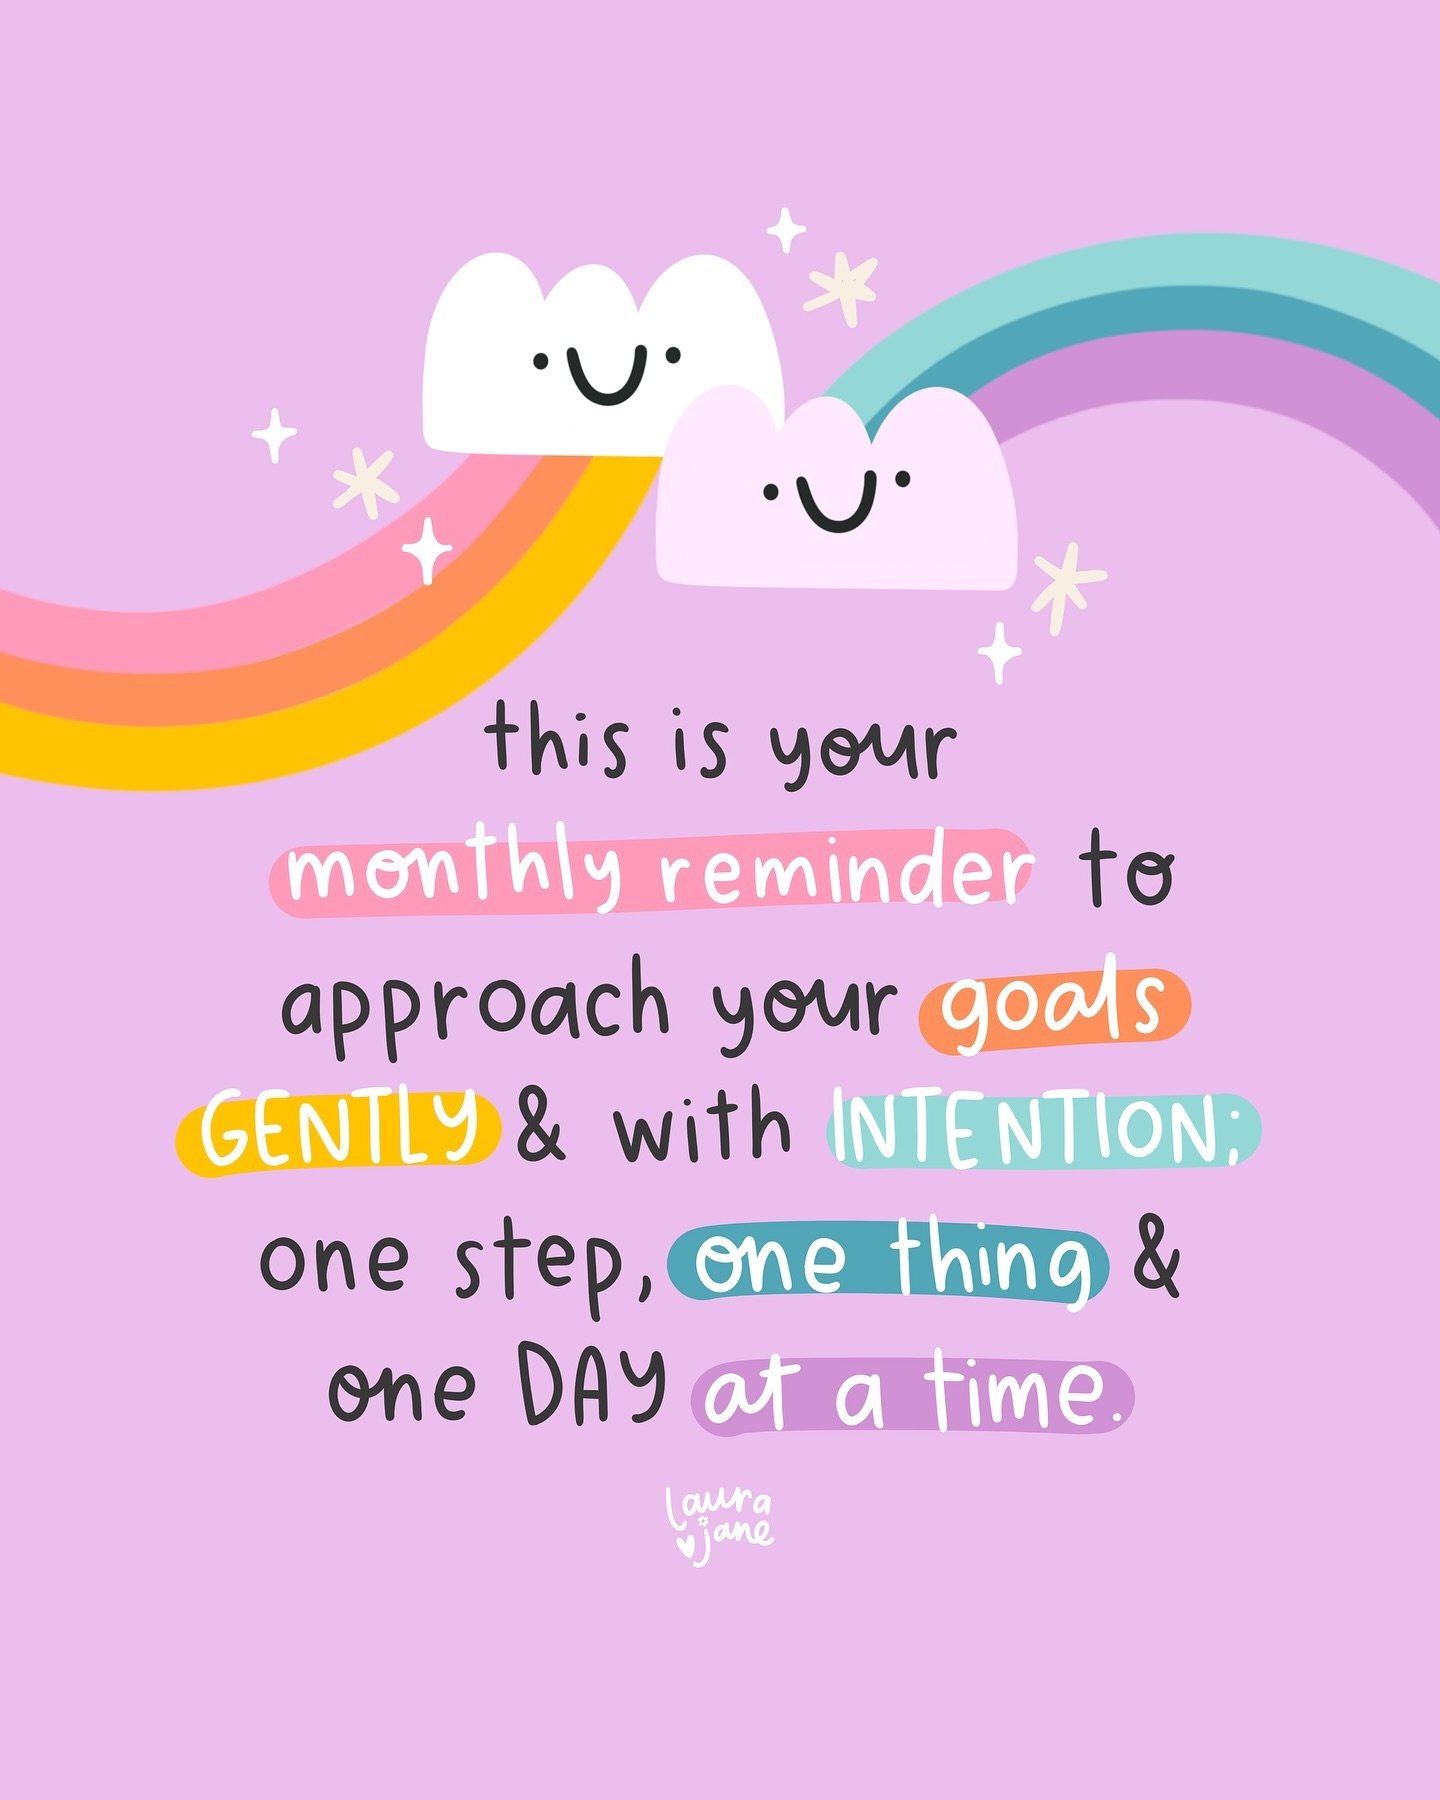 End of the month reminder to check in with your goals with as much self-compassion as determination and drive. 

What energy do you want to show up to May with?
What new goals are you ready to set for yourself and how will you work towards them one d